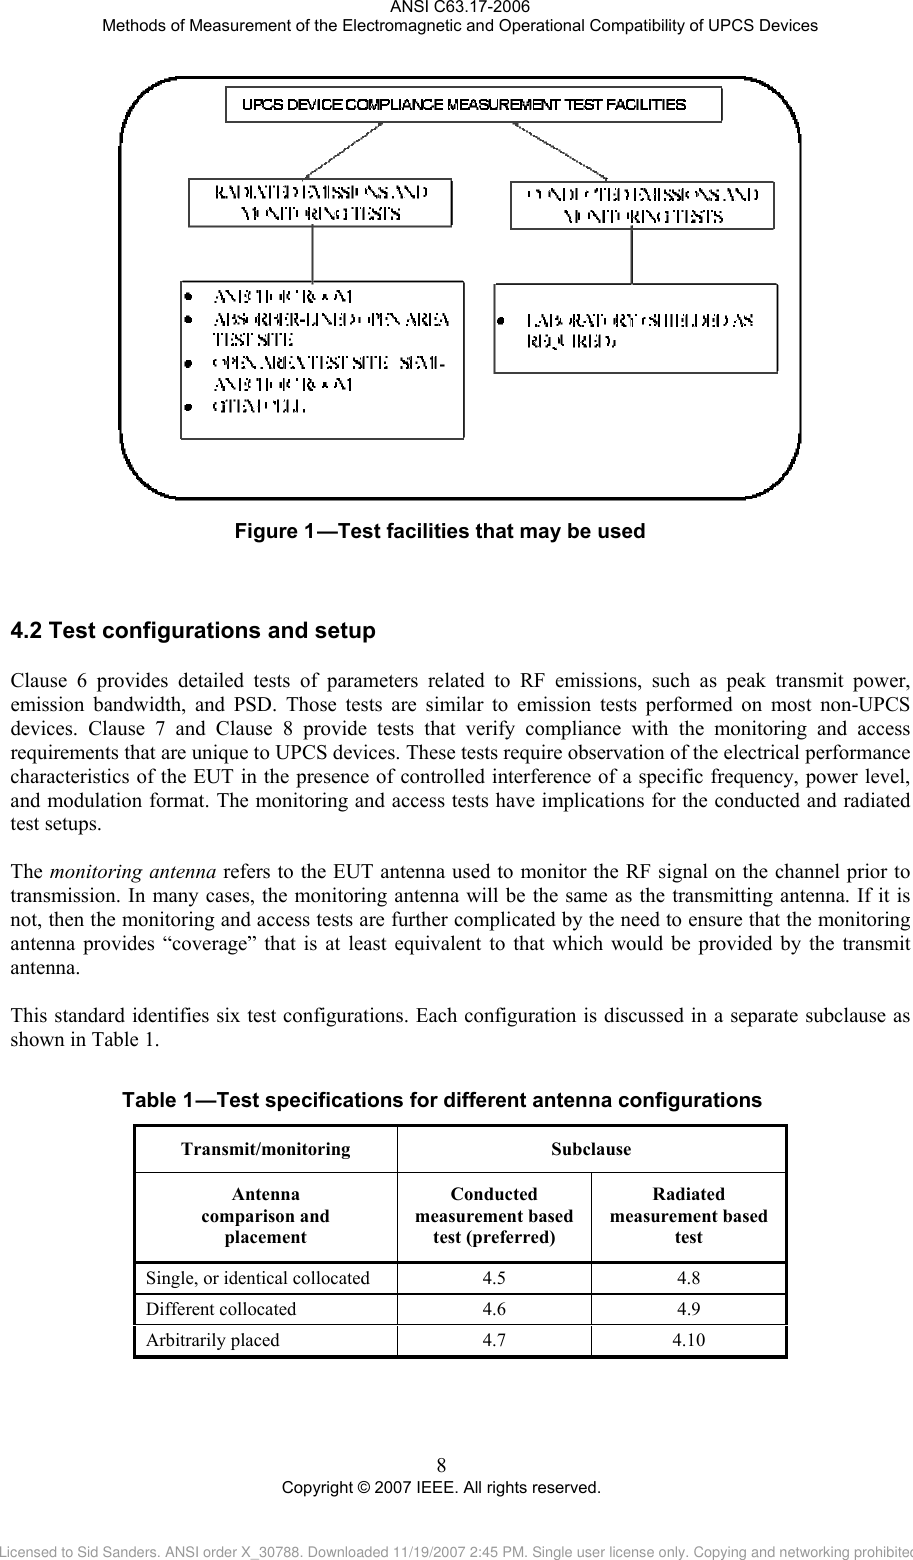 ANSI C63.17-2006 Methods of Measurement of the Electromagnetic and Operational Compatibility of UPCS Devices  Figure 14.2Table 1 —Test facilities that may be used   Test configurations and setup Clause 6 provides detailed tests of parameters related to RF emissions, such as peak transmit power, emission bandwidth, and PSD. Those tests are similar to emission tests performed on most non-UPCS devices. Clause 7 and Clause 8 provide tests that verify compliance with the monitoring and access requirements that are unique to UPCS devices. These tests require observation of the electrical performance characteristics of the EUT in the presence of controlled interference of a specific frequency, power level, and modulation format. The monitoring and access tests have implications for the conducted and radiated test setups.  The monitoring antenna refers to the EUT antenna used to monitor the RF signal on the channel prior to transmission. In many cases, the monitoring antenna will be the same as the transmitting antenna. If it is not, then the monitoring and access tests are further complicated by the need to ensure that the monitoring antenna provides “coverage” that is at least equivalent to that which would be provided by the transmit antenna.  This standard identifies six test configurations. Each configuration is discussed in a separate subclause as shown in Table 1.   —Test specifications for different antenna configurations Transmit/monitoring Subclause Antenna  comparison and  placement Conducted  measurement based test (preferred) Radiated  measurement based  test Single, or identical collocated  4.5  4.8 Different collocated  4.6  4.9 Arbitrarily placed  4.7  4.10  8 Copyright © 2007 IEEE. All rights reserved. Licensed to Sid Sanders. ANSI order X_30788. Downloaded 11/19/2007 2:45 PM. Single user license only. Copying and networking prohibited.